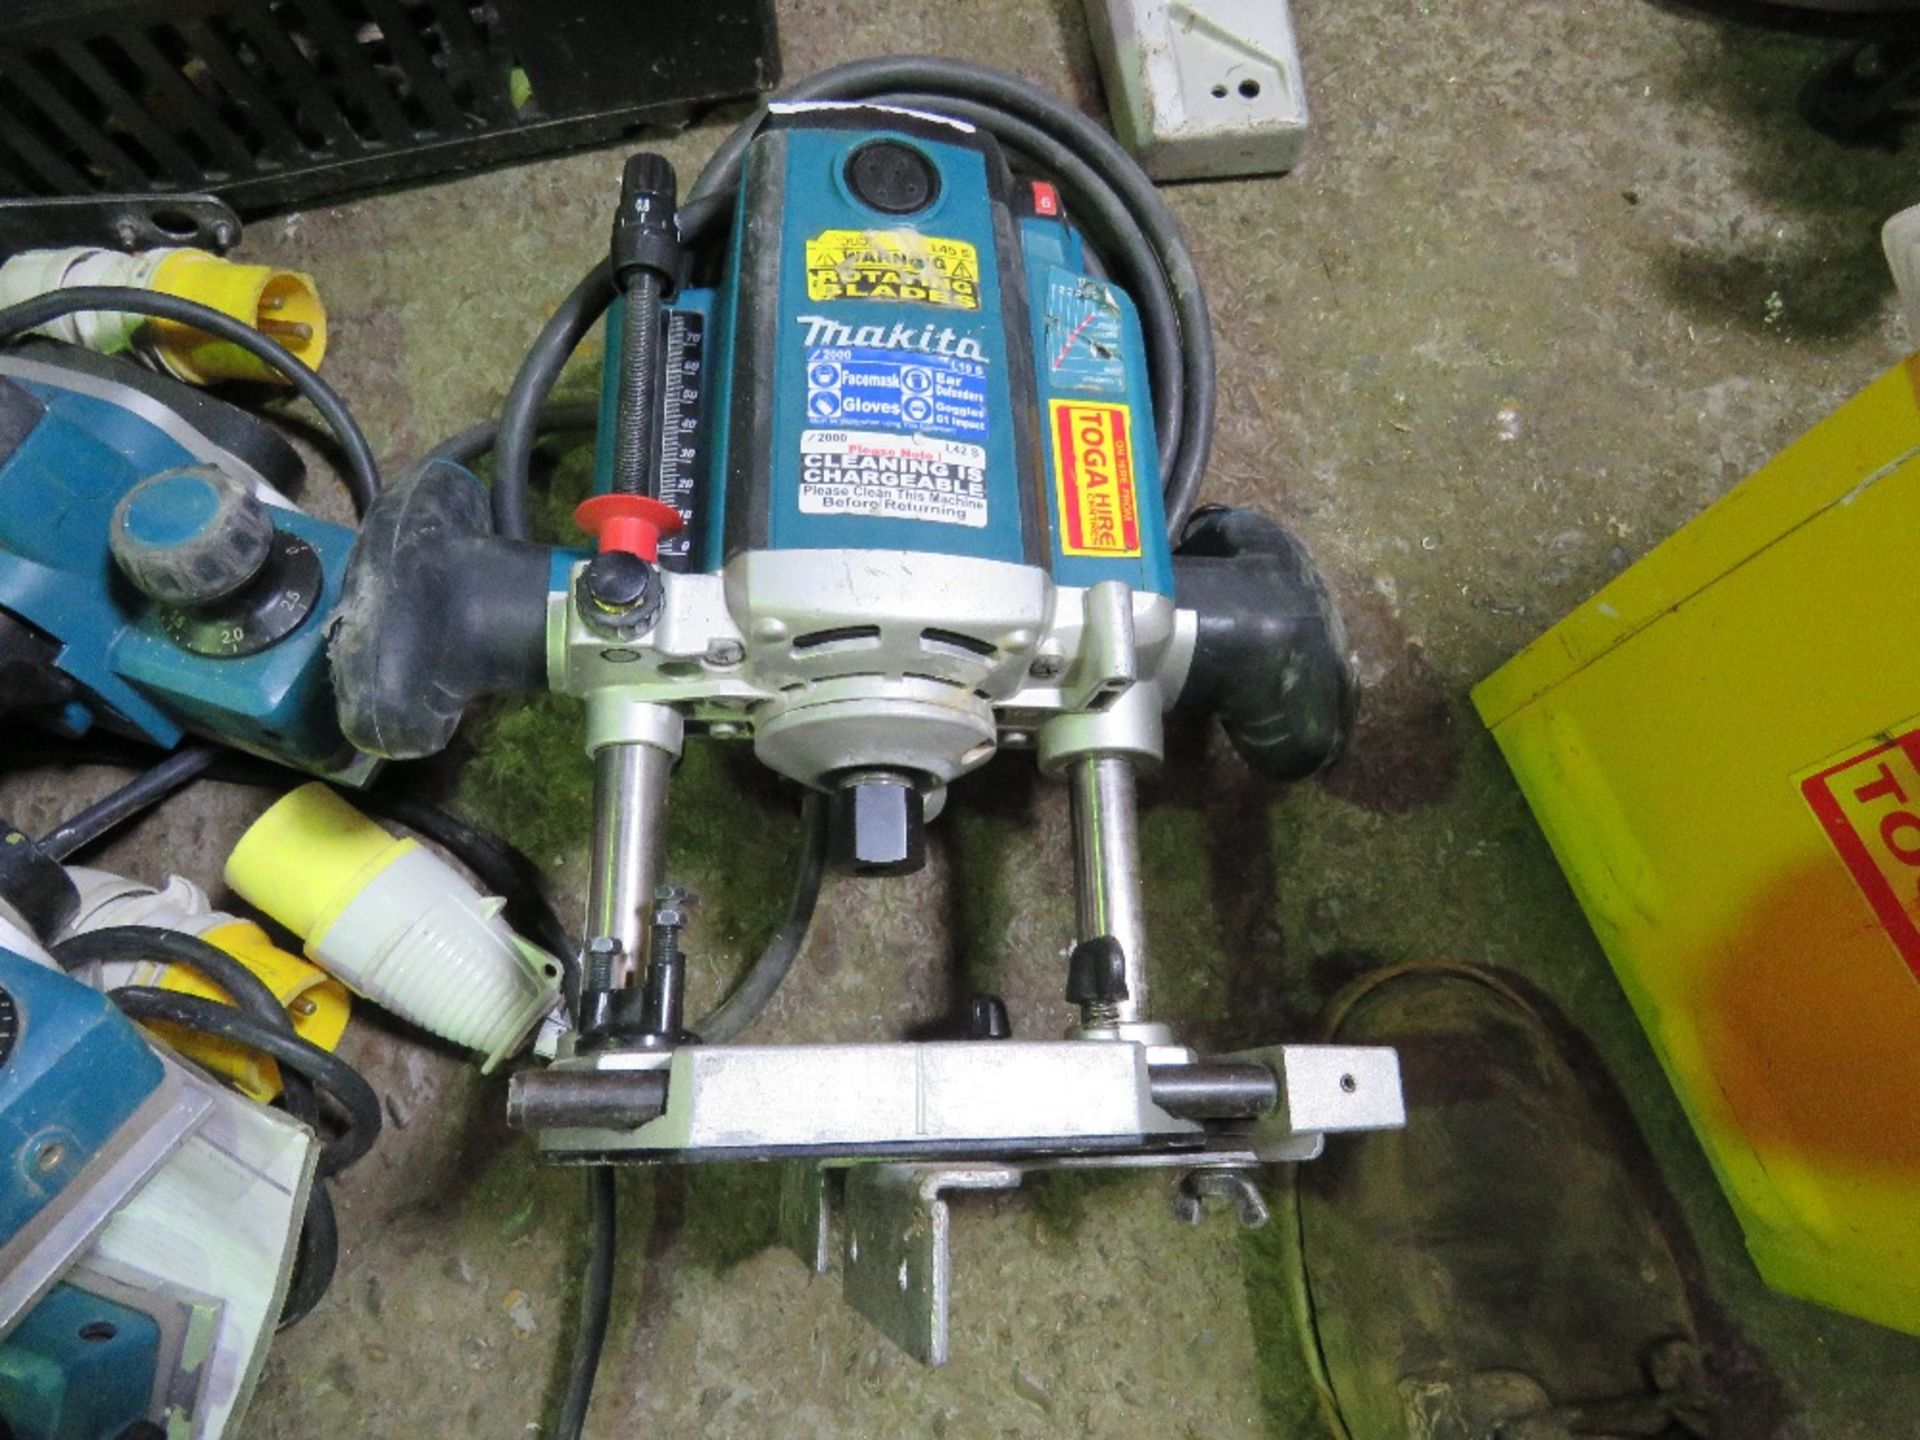 MAKITA 110VOLT ROUTER. UNTESTED, CONDITION UNKNOWN.